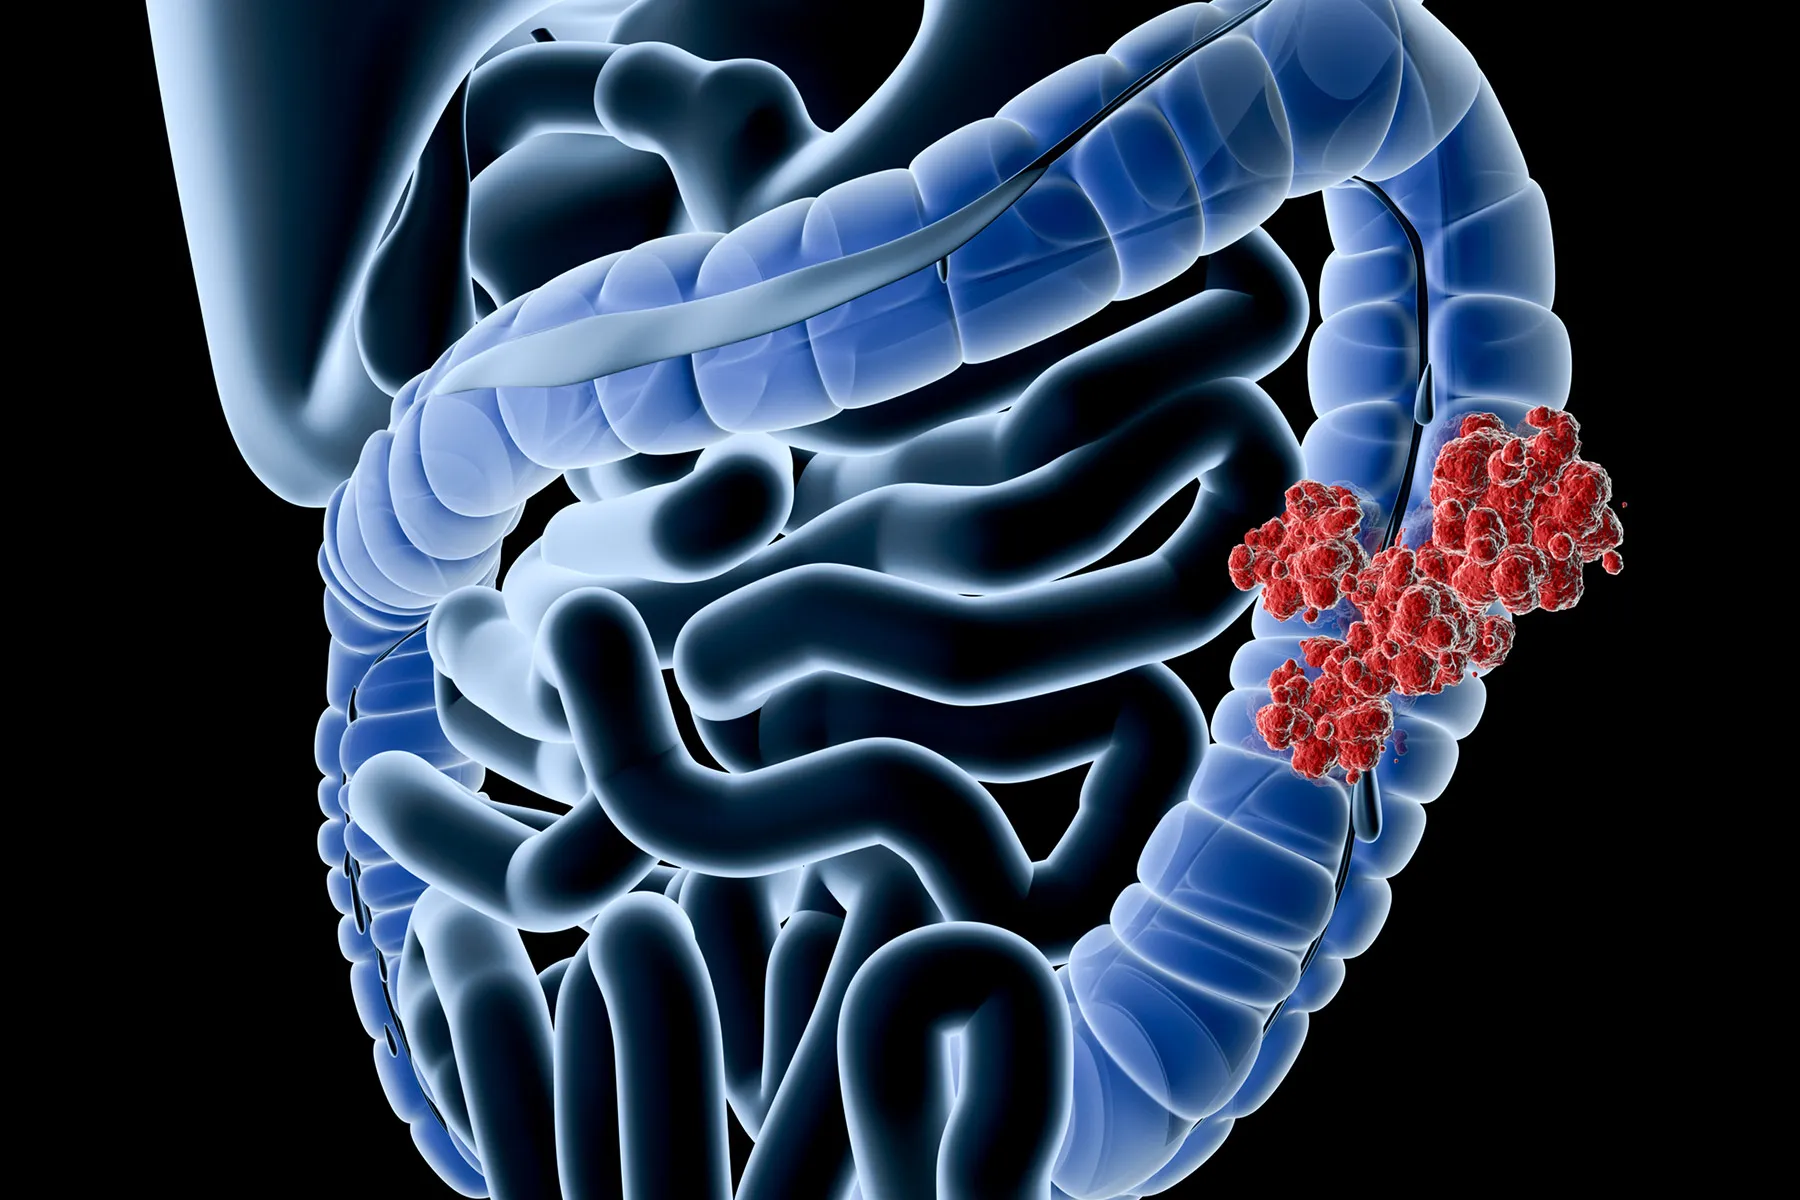 Early Onset Colorectal Cancer: Why Is This Happening?